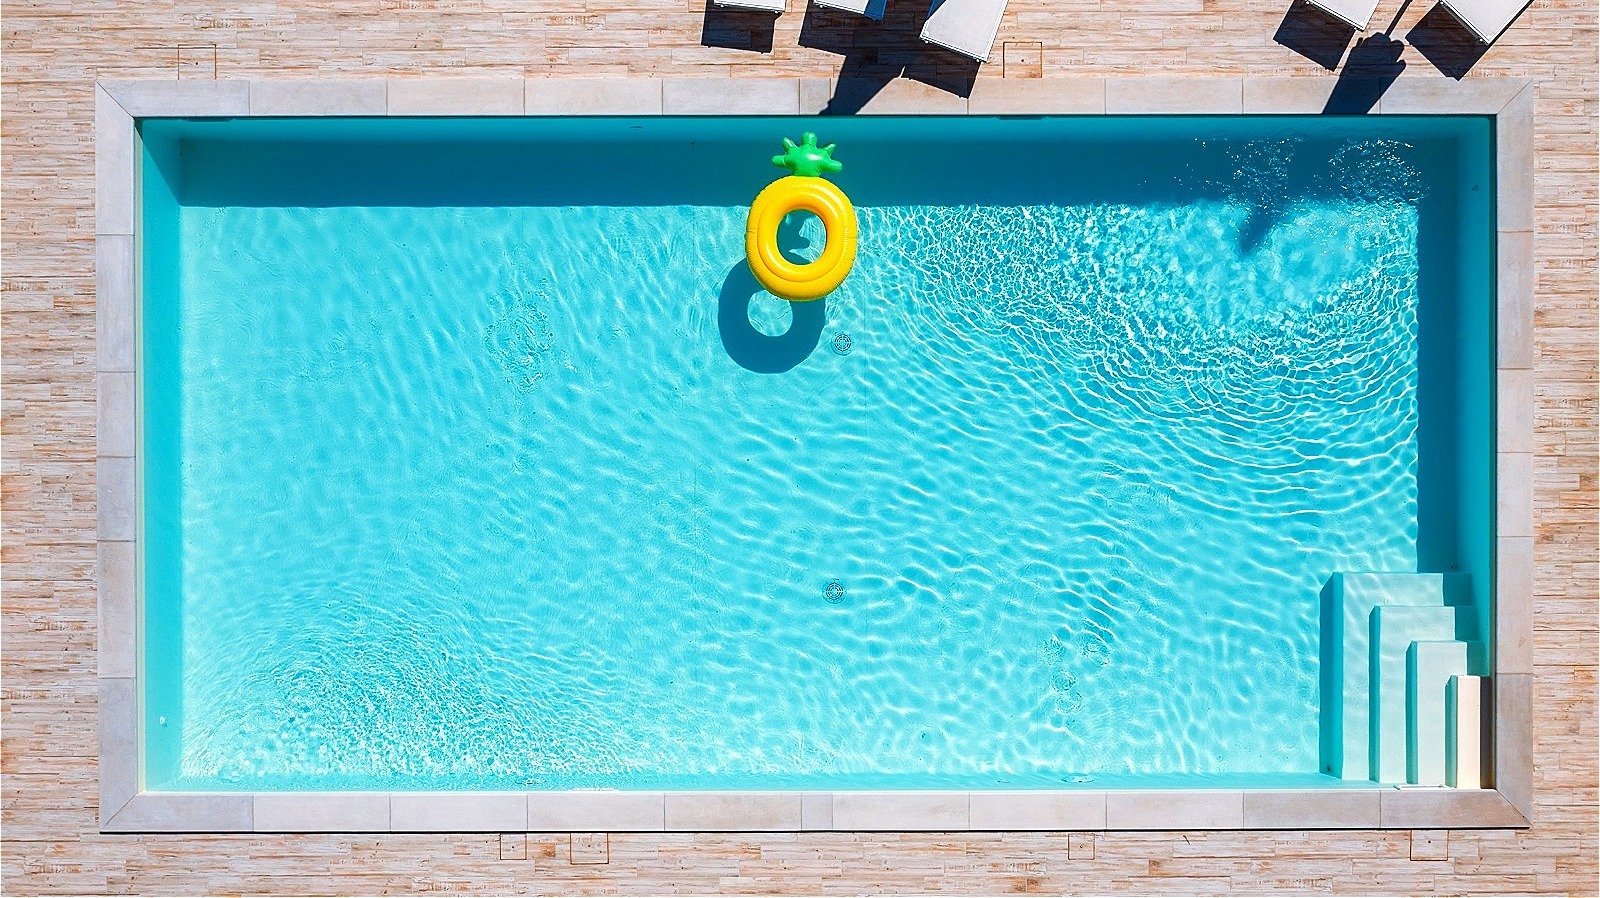 The Tennis Ball Hack All Pool Owners Should Know About - House Digest